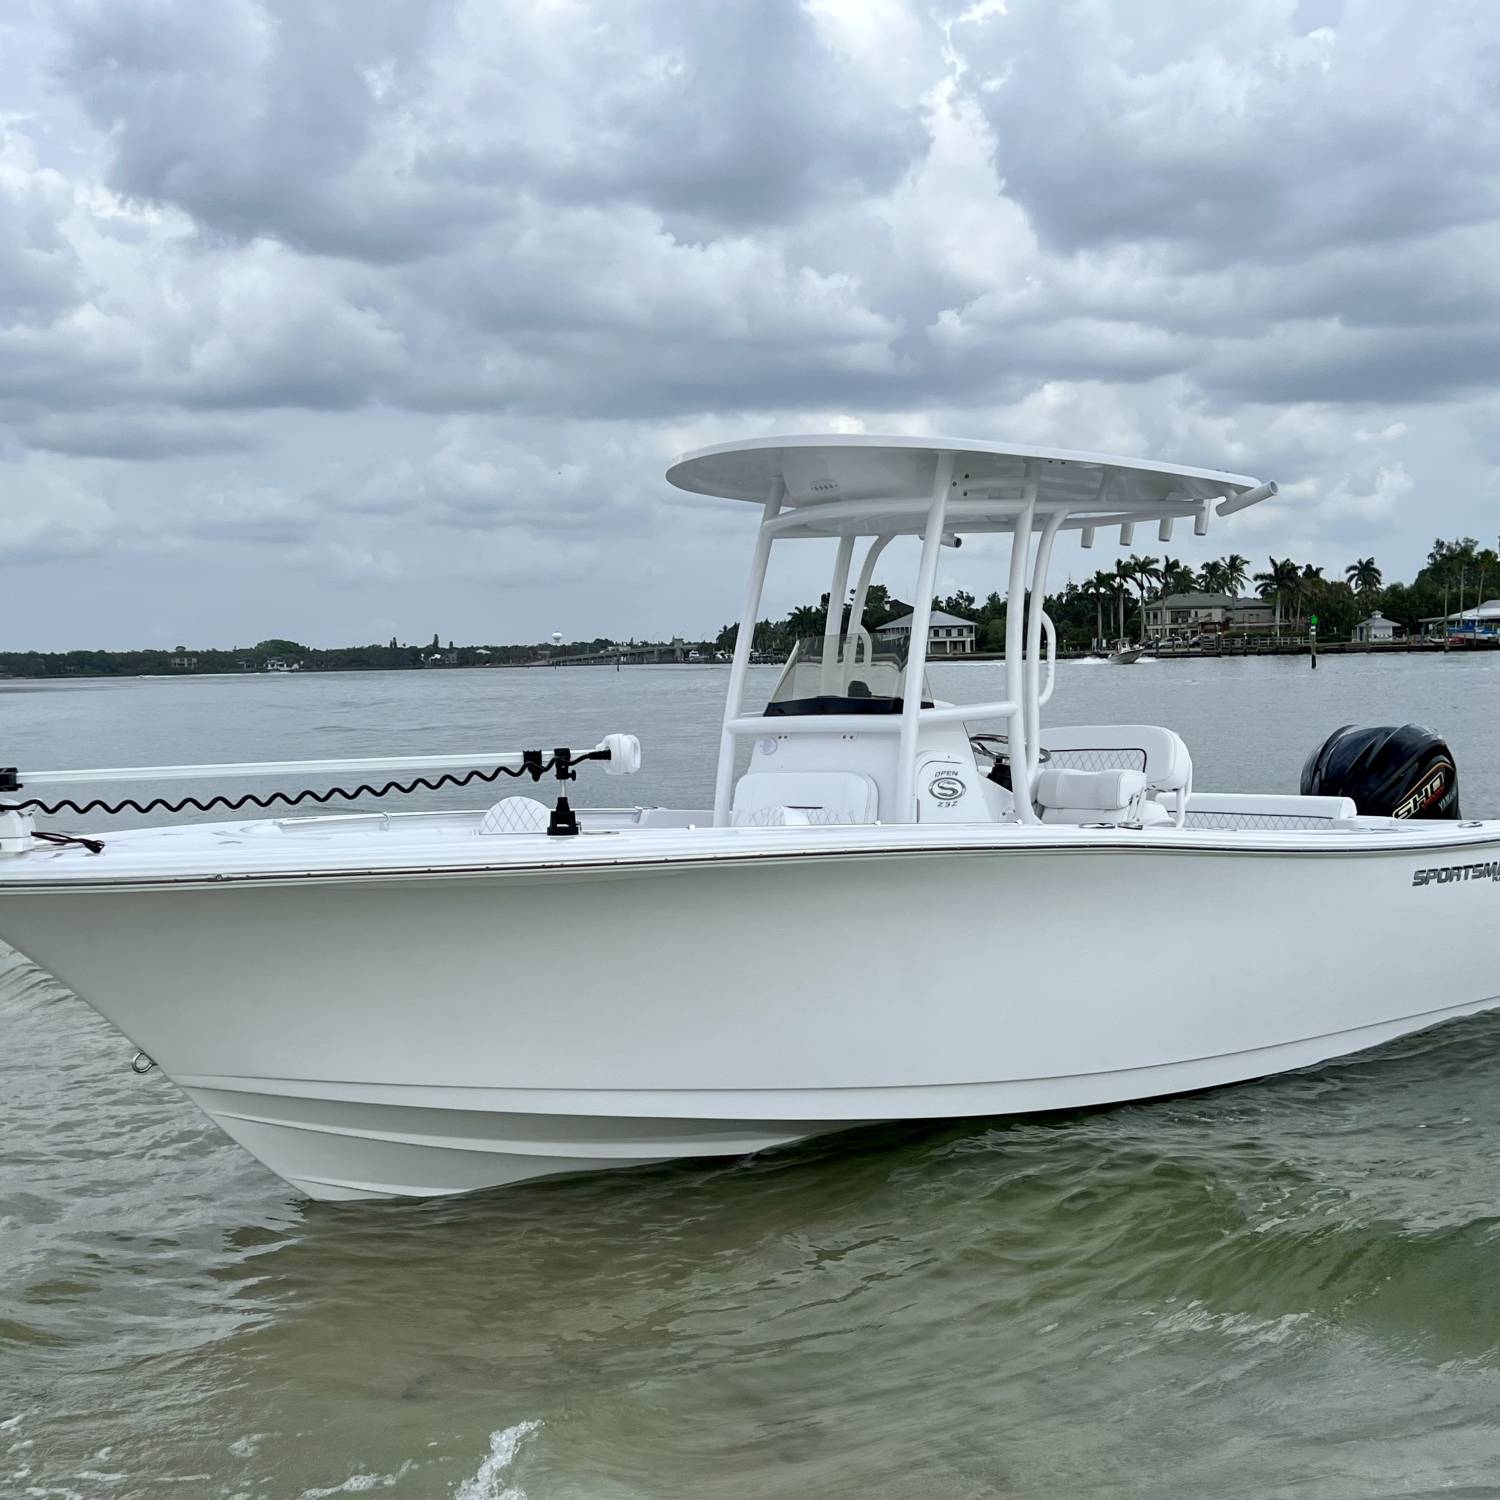 Title: My awesome 232 Open! - On board their Sportsman Open 232 Center Console - Location: Siesta Key. Participating in the Photo Contest #SportsmanNovember2023